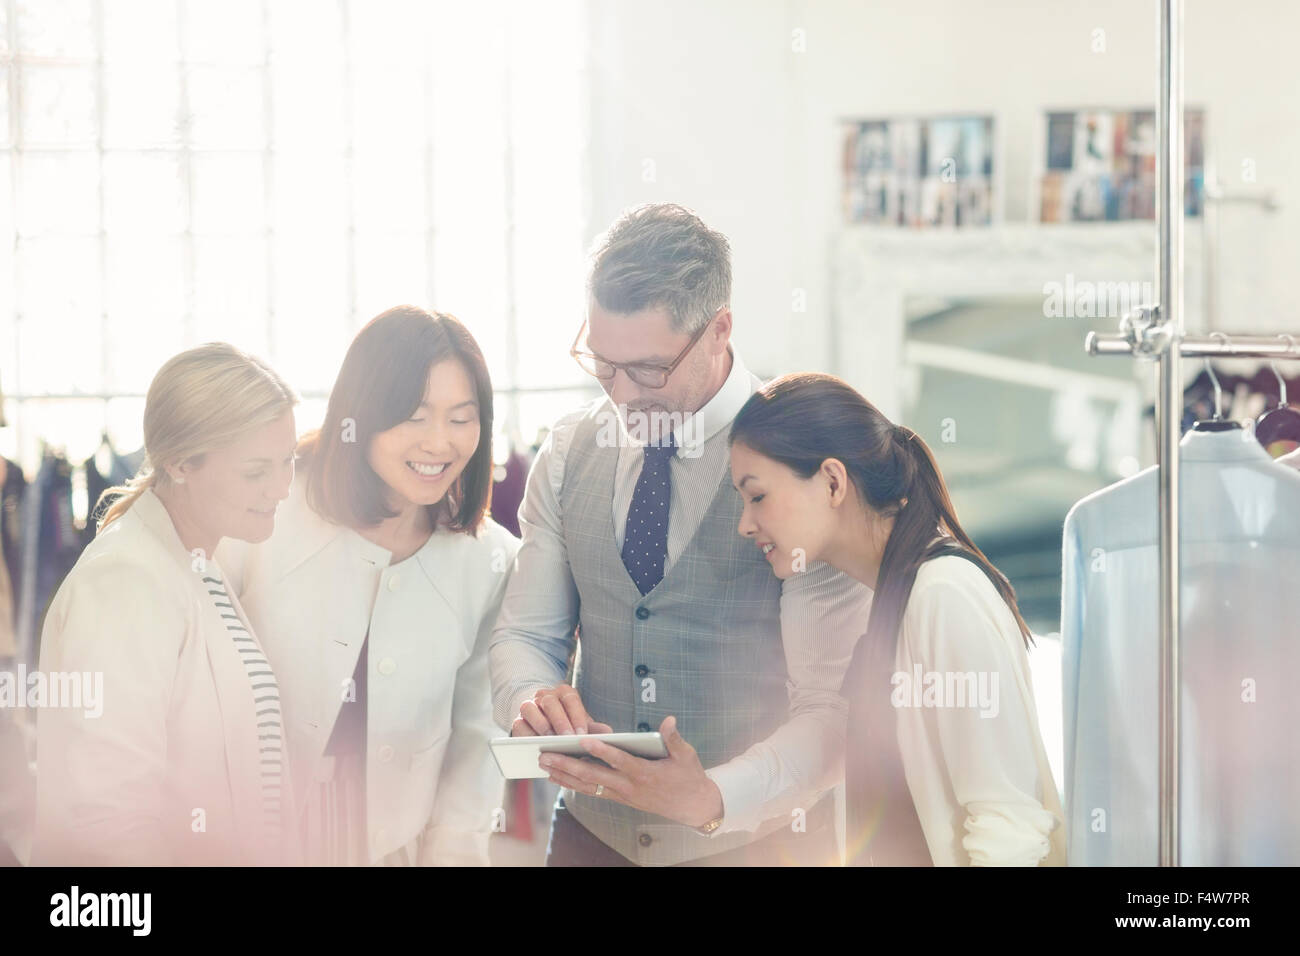 Fashion designers sharing digital tablet in office Stock Photo